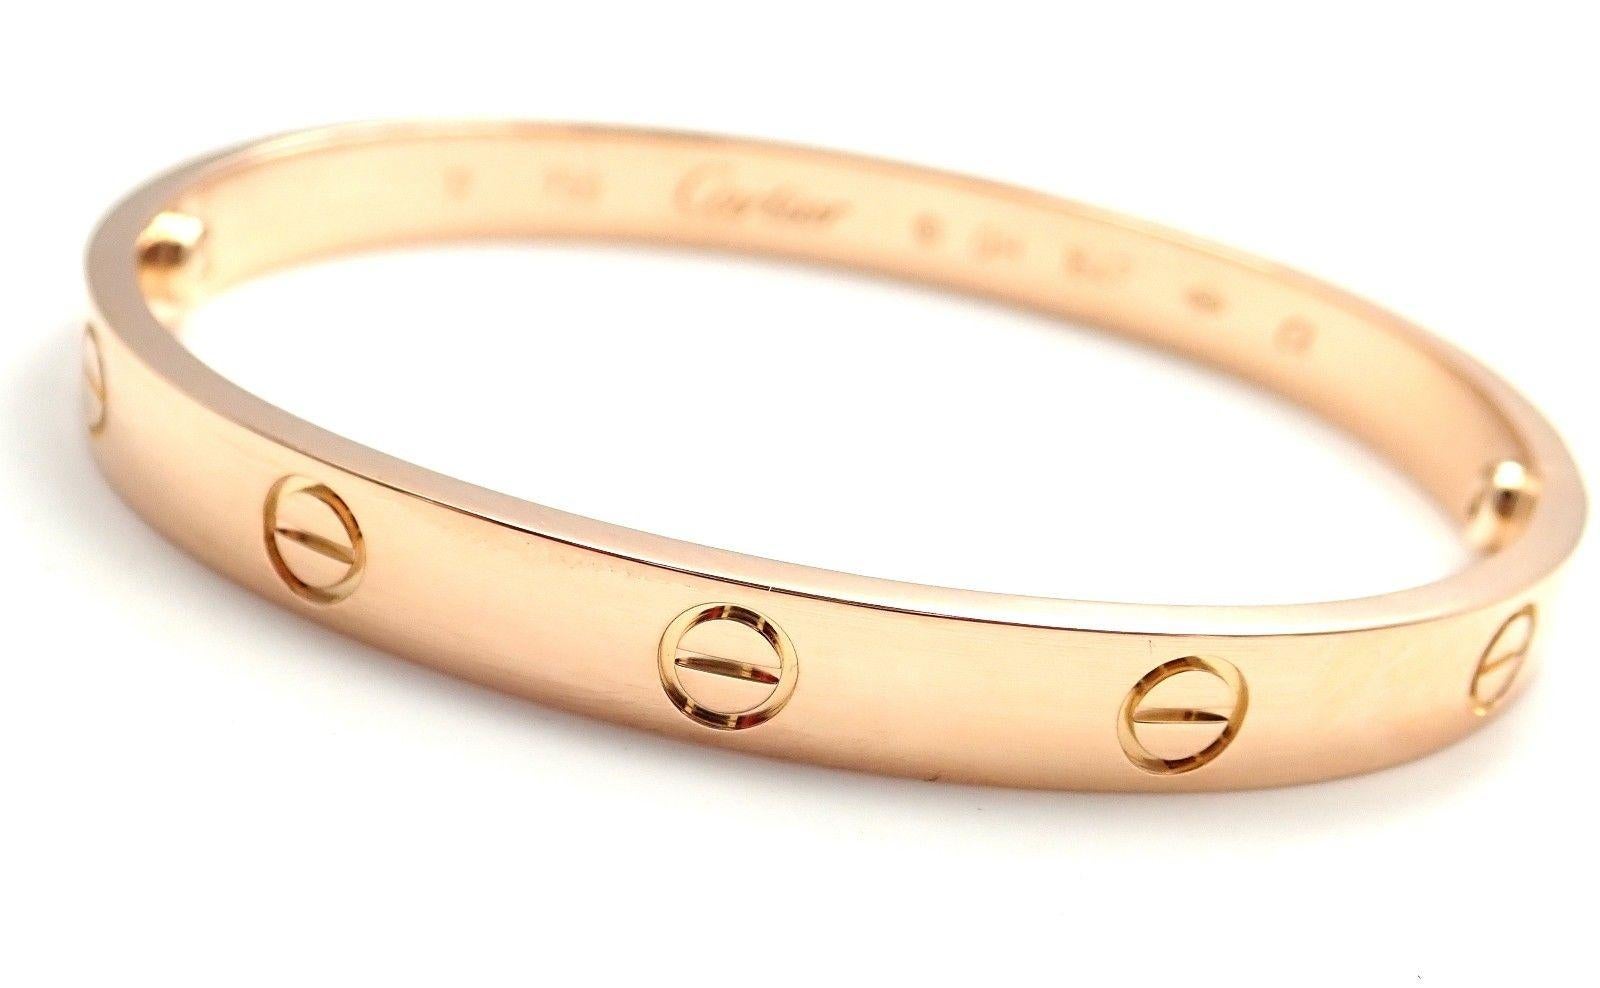 18k Rose Gold Love Bangle Bracelet by Cartier. 
Size 17.  
This bracelet comes with service paper from Cartier store in Japan, a Cartier Box and a Cartier 
screwdriver.
Details: 
Size: 17 
Weight: 32 grams
Width: 6.5mm 
Hallmarks: Cartier 750 17